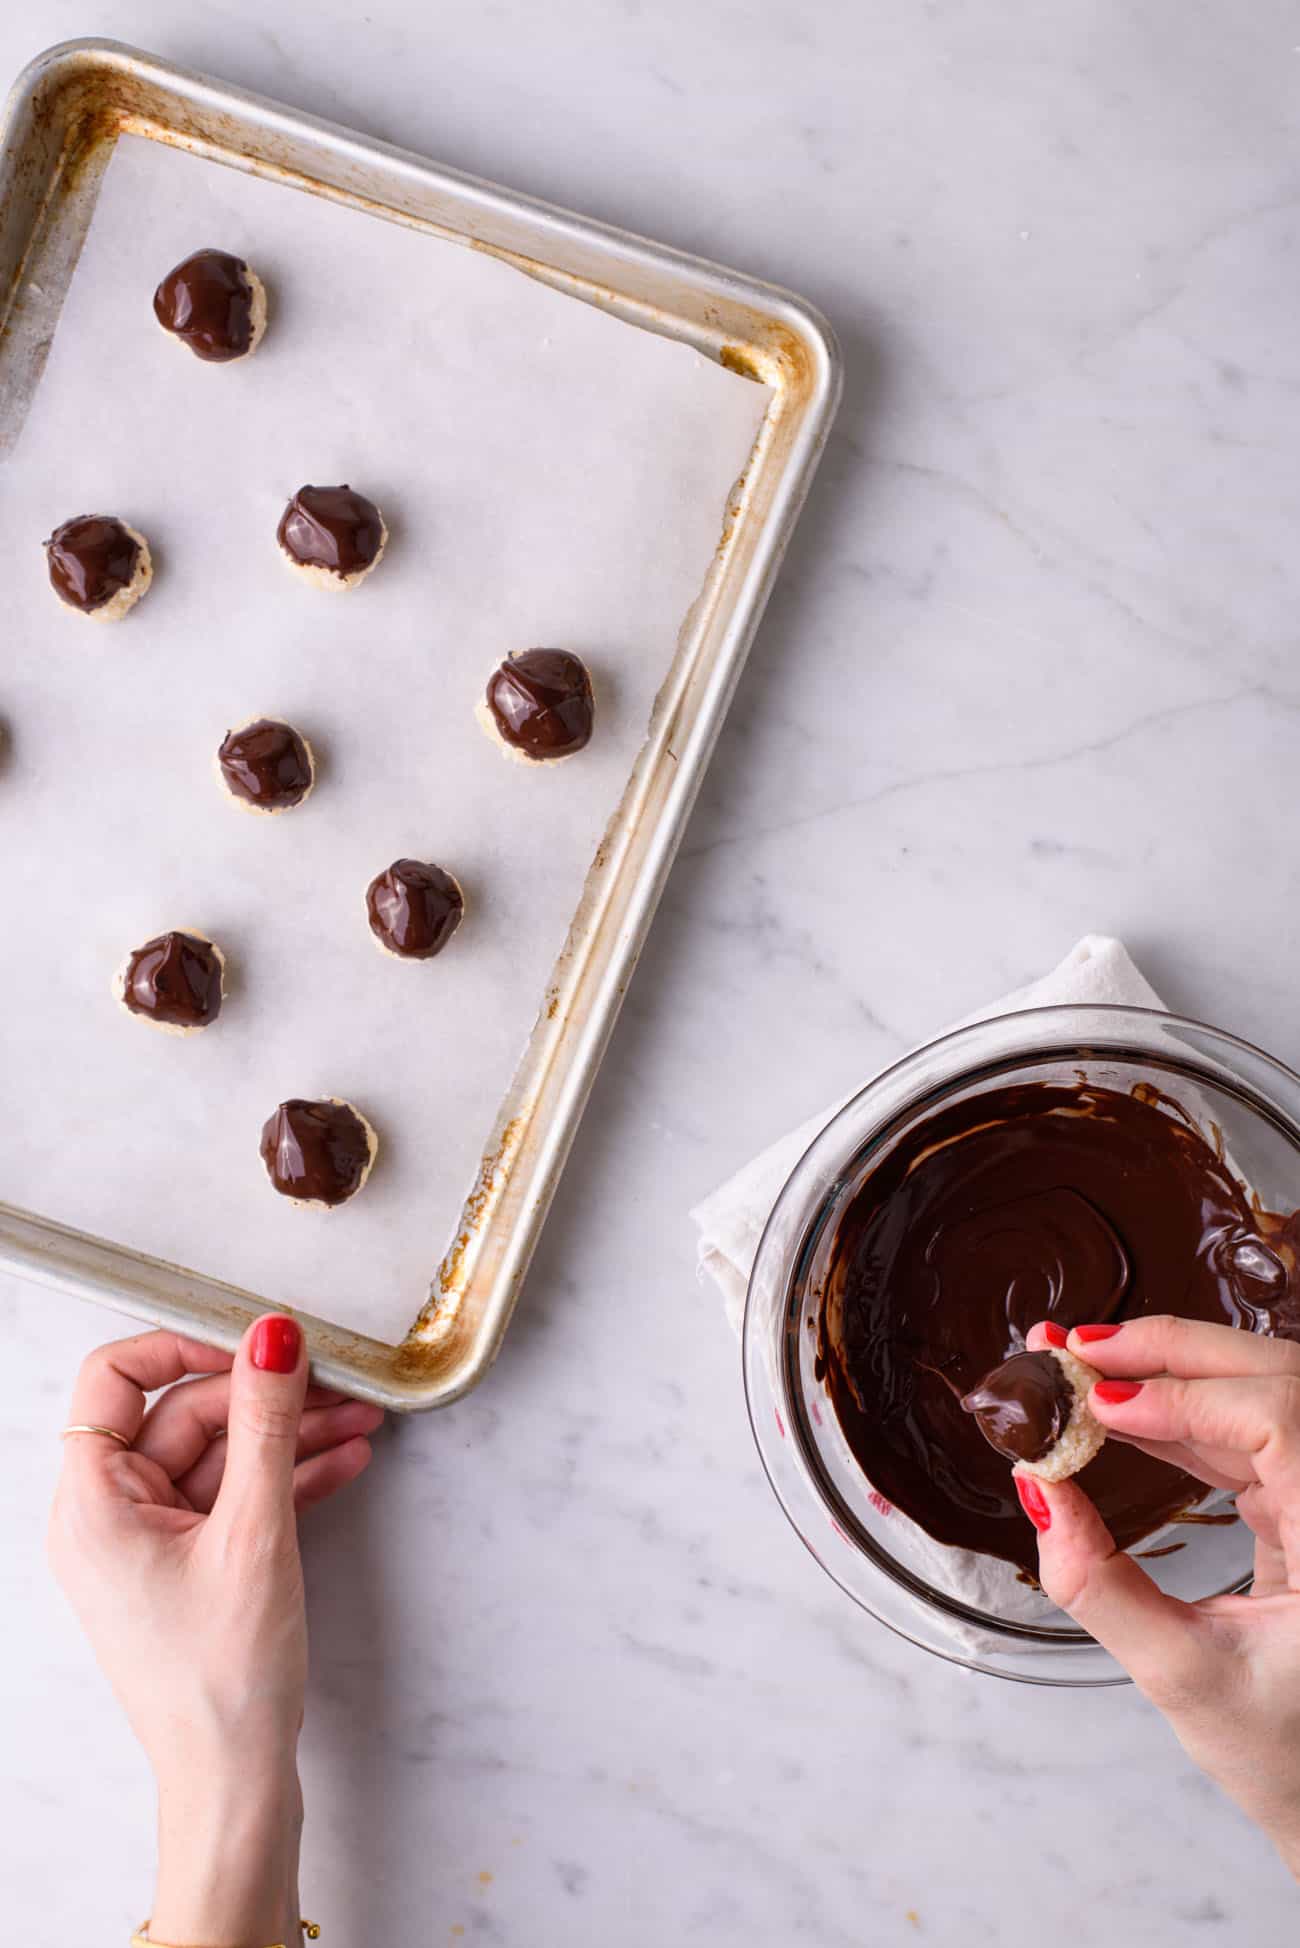 Woman's hands dipping coconut balls into melted chocolate